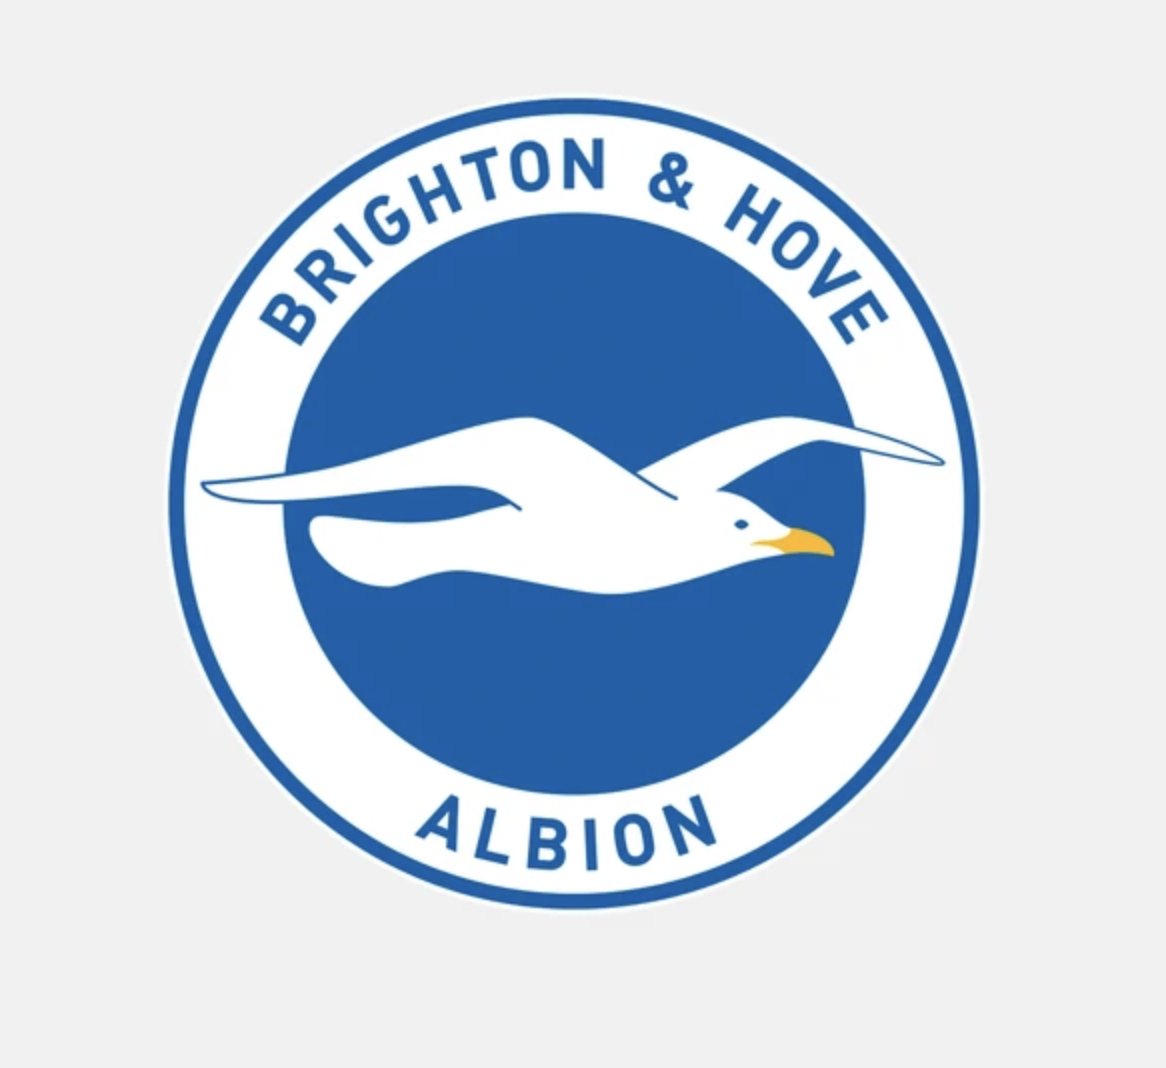 BRIGHTON AND HOVE ALBION: FIFA STREETKind of a cool idea and felt fresh at one point, but just awful in reality. /3